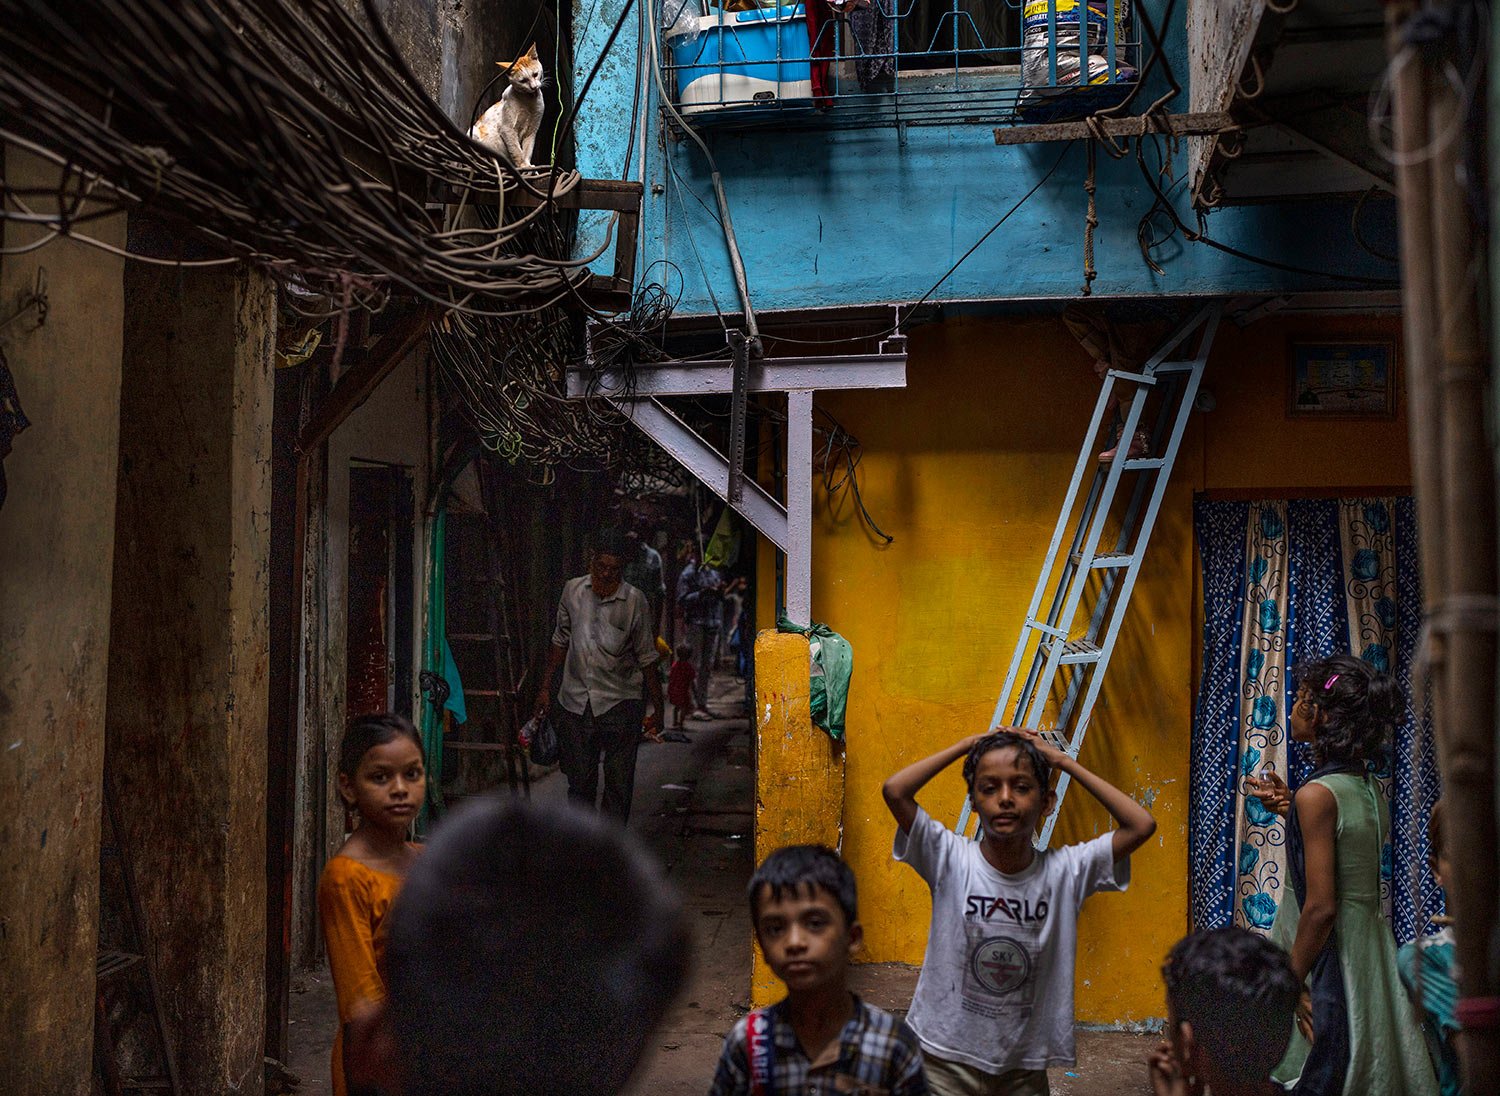  A cat sits on overhanging cables as children play in a narrow lane at a slum in Dharavi, Mumbai, India, Thursday, May 19, 2022. (AP Photo/Rafiq Maqbool) 